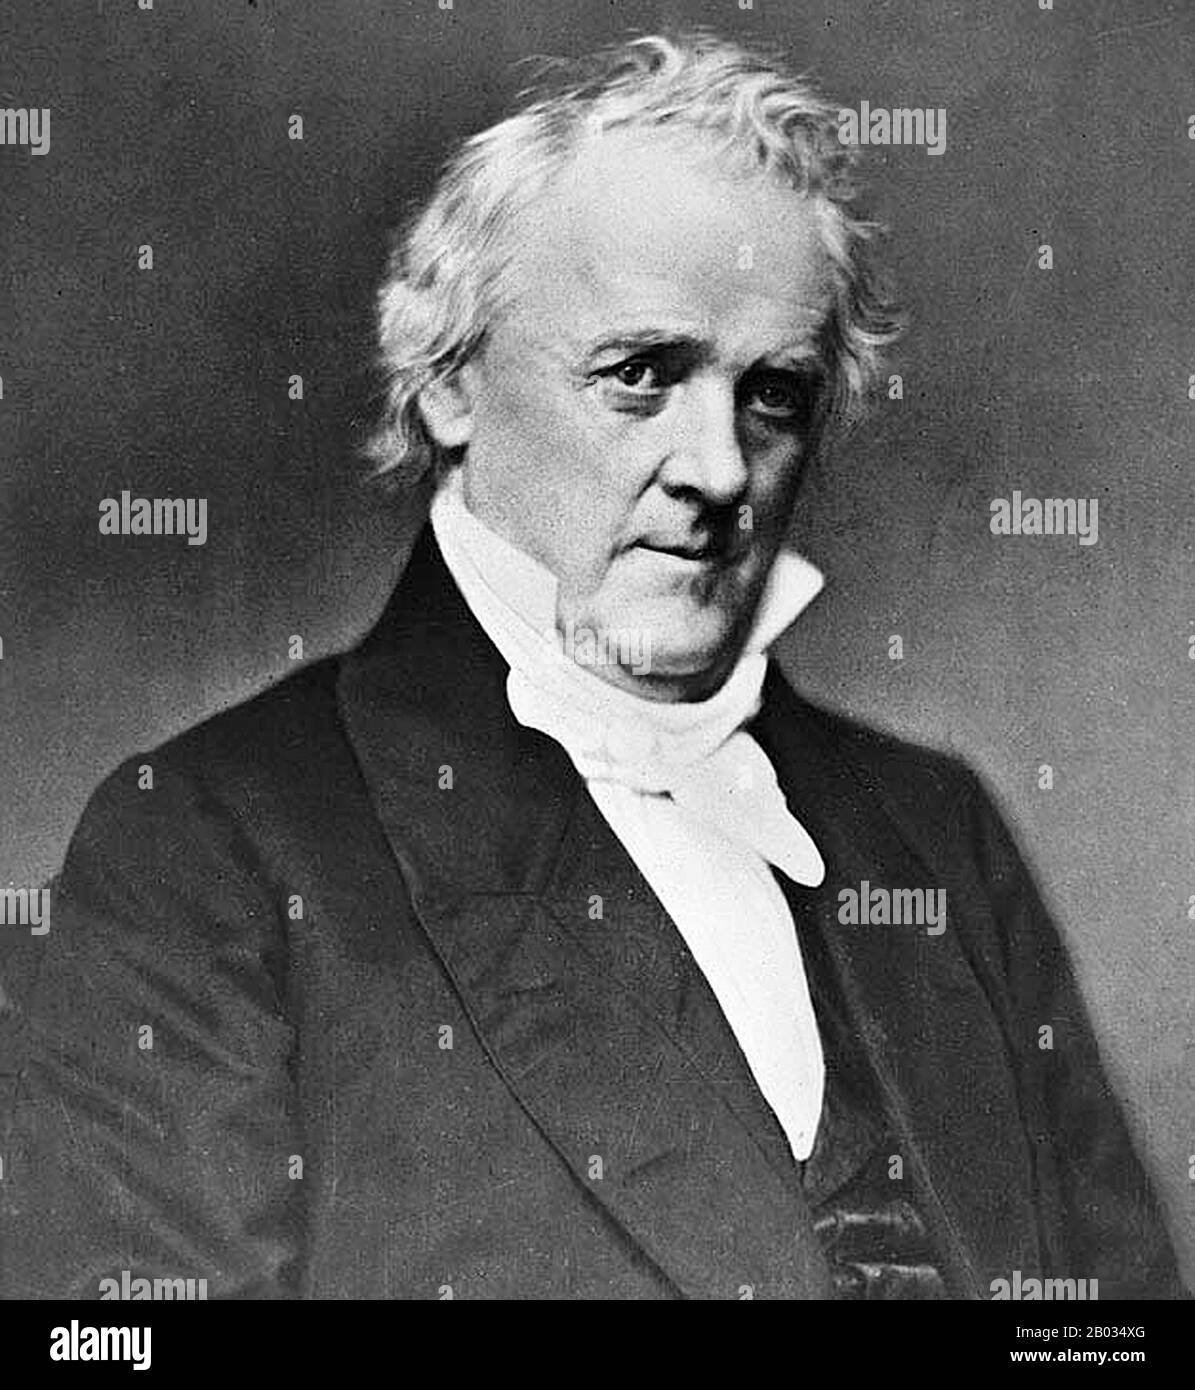 James Buchanan, Jr. (April 23, 1791 – June 1, 1868) was the 15th President of the United States (1857–61), serving immediately prior to the American Civil War. He represented Pennsylvania in the United States House of Representatives and later the Senate, then served as Minister to Russia under President Andrew Jackson.  He was named Secretary of State under President James K. Polk, and as of 2016 is the last former Secretary of State to serve as President of the United States. After Buchanan turned down an offer to sit on the Supreme Court, President Franklin Pierce appointed him Ambassador t Stock Photo